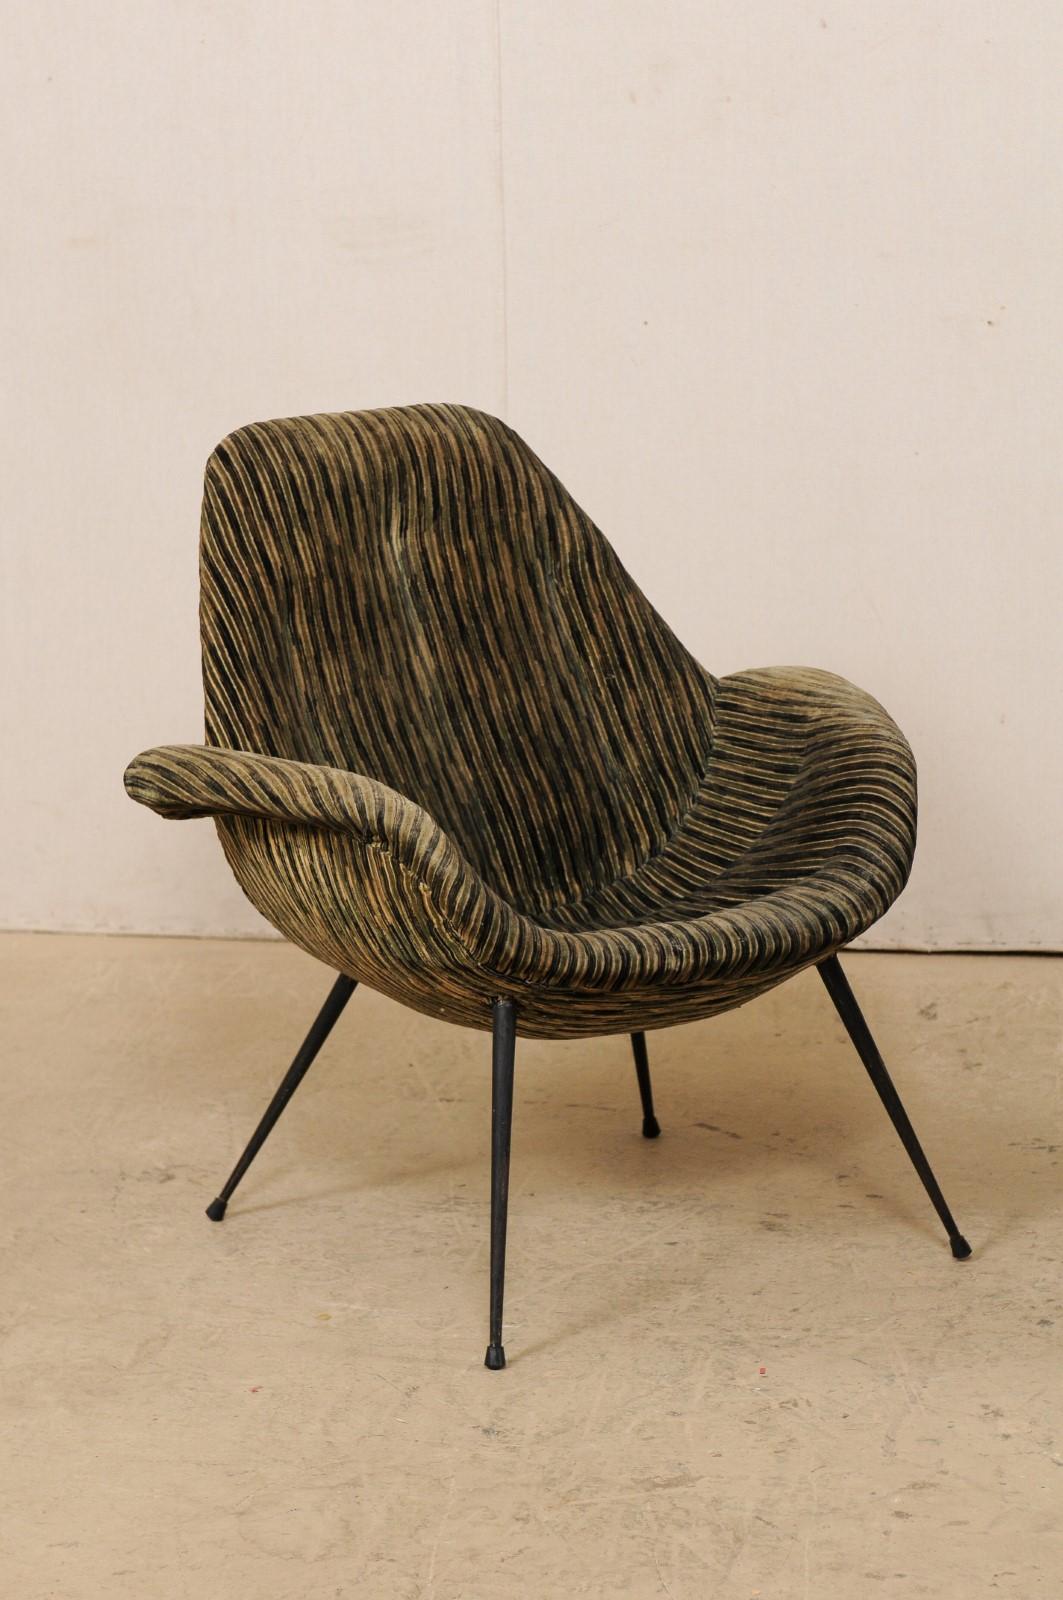 20th Century Italian Pair of Mid-Century Modern Club Chairs, Upholstered with Iron Legs